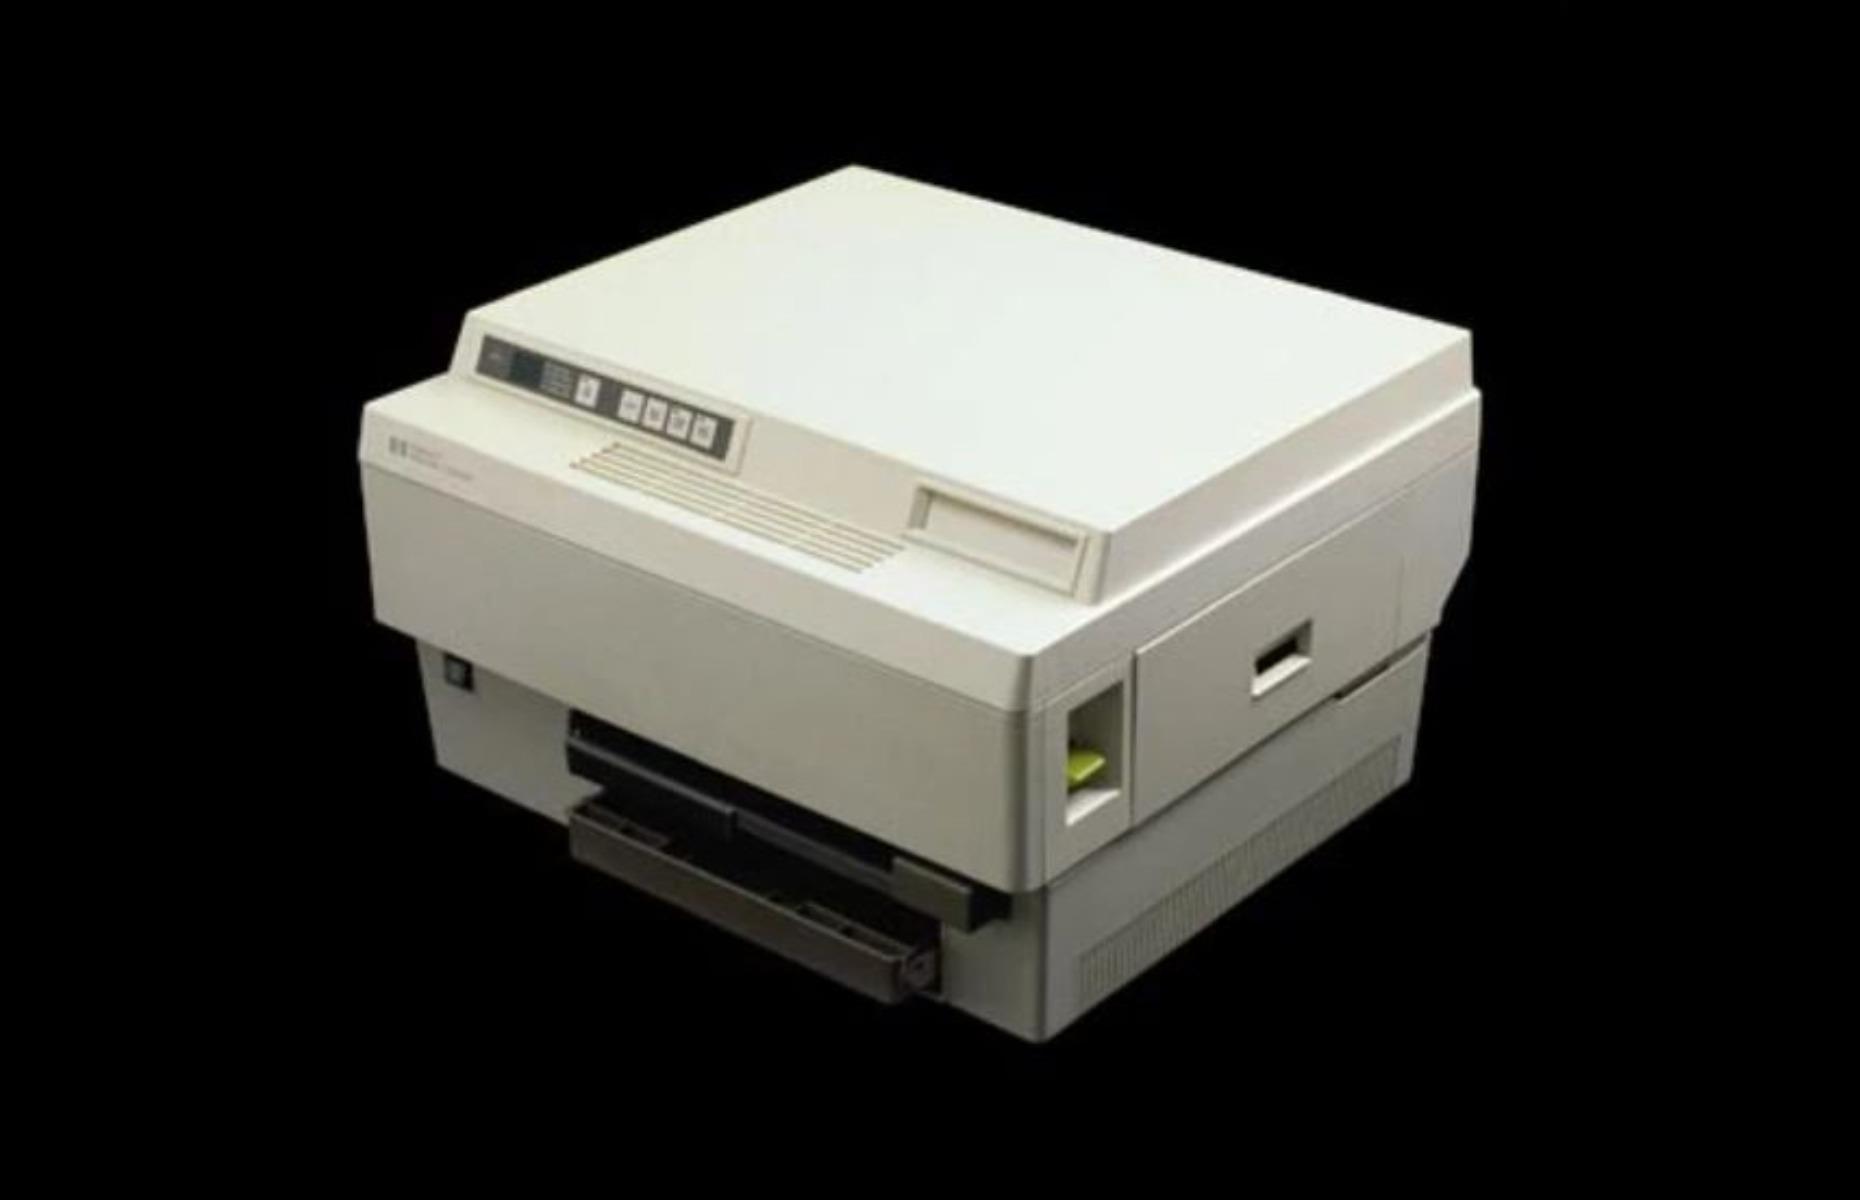 Laser printers: became widely affordable in the 2000s